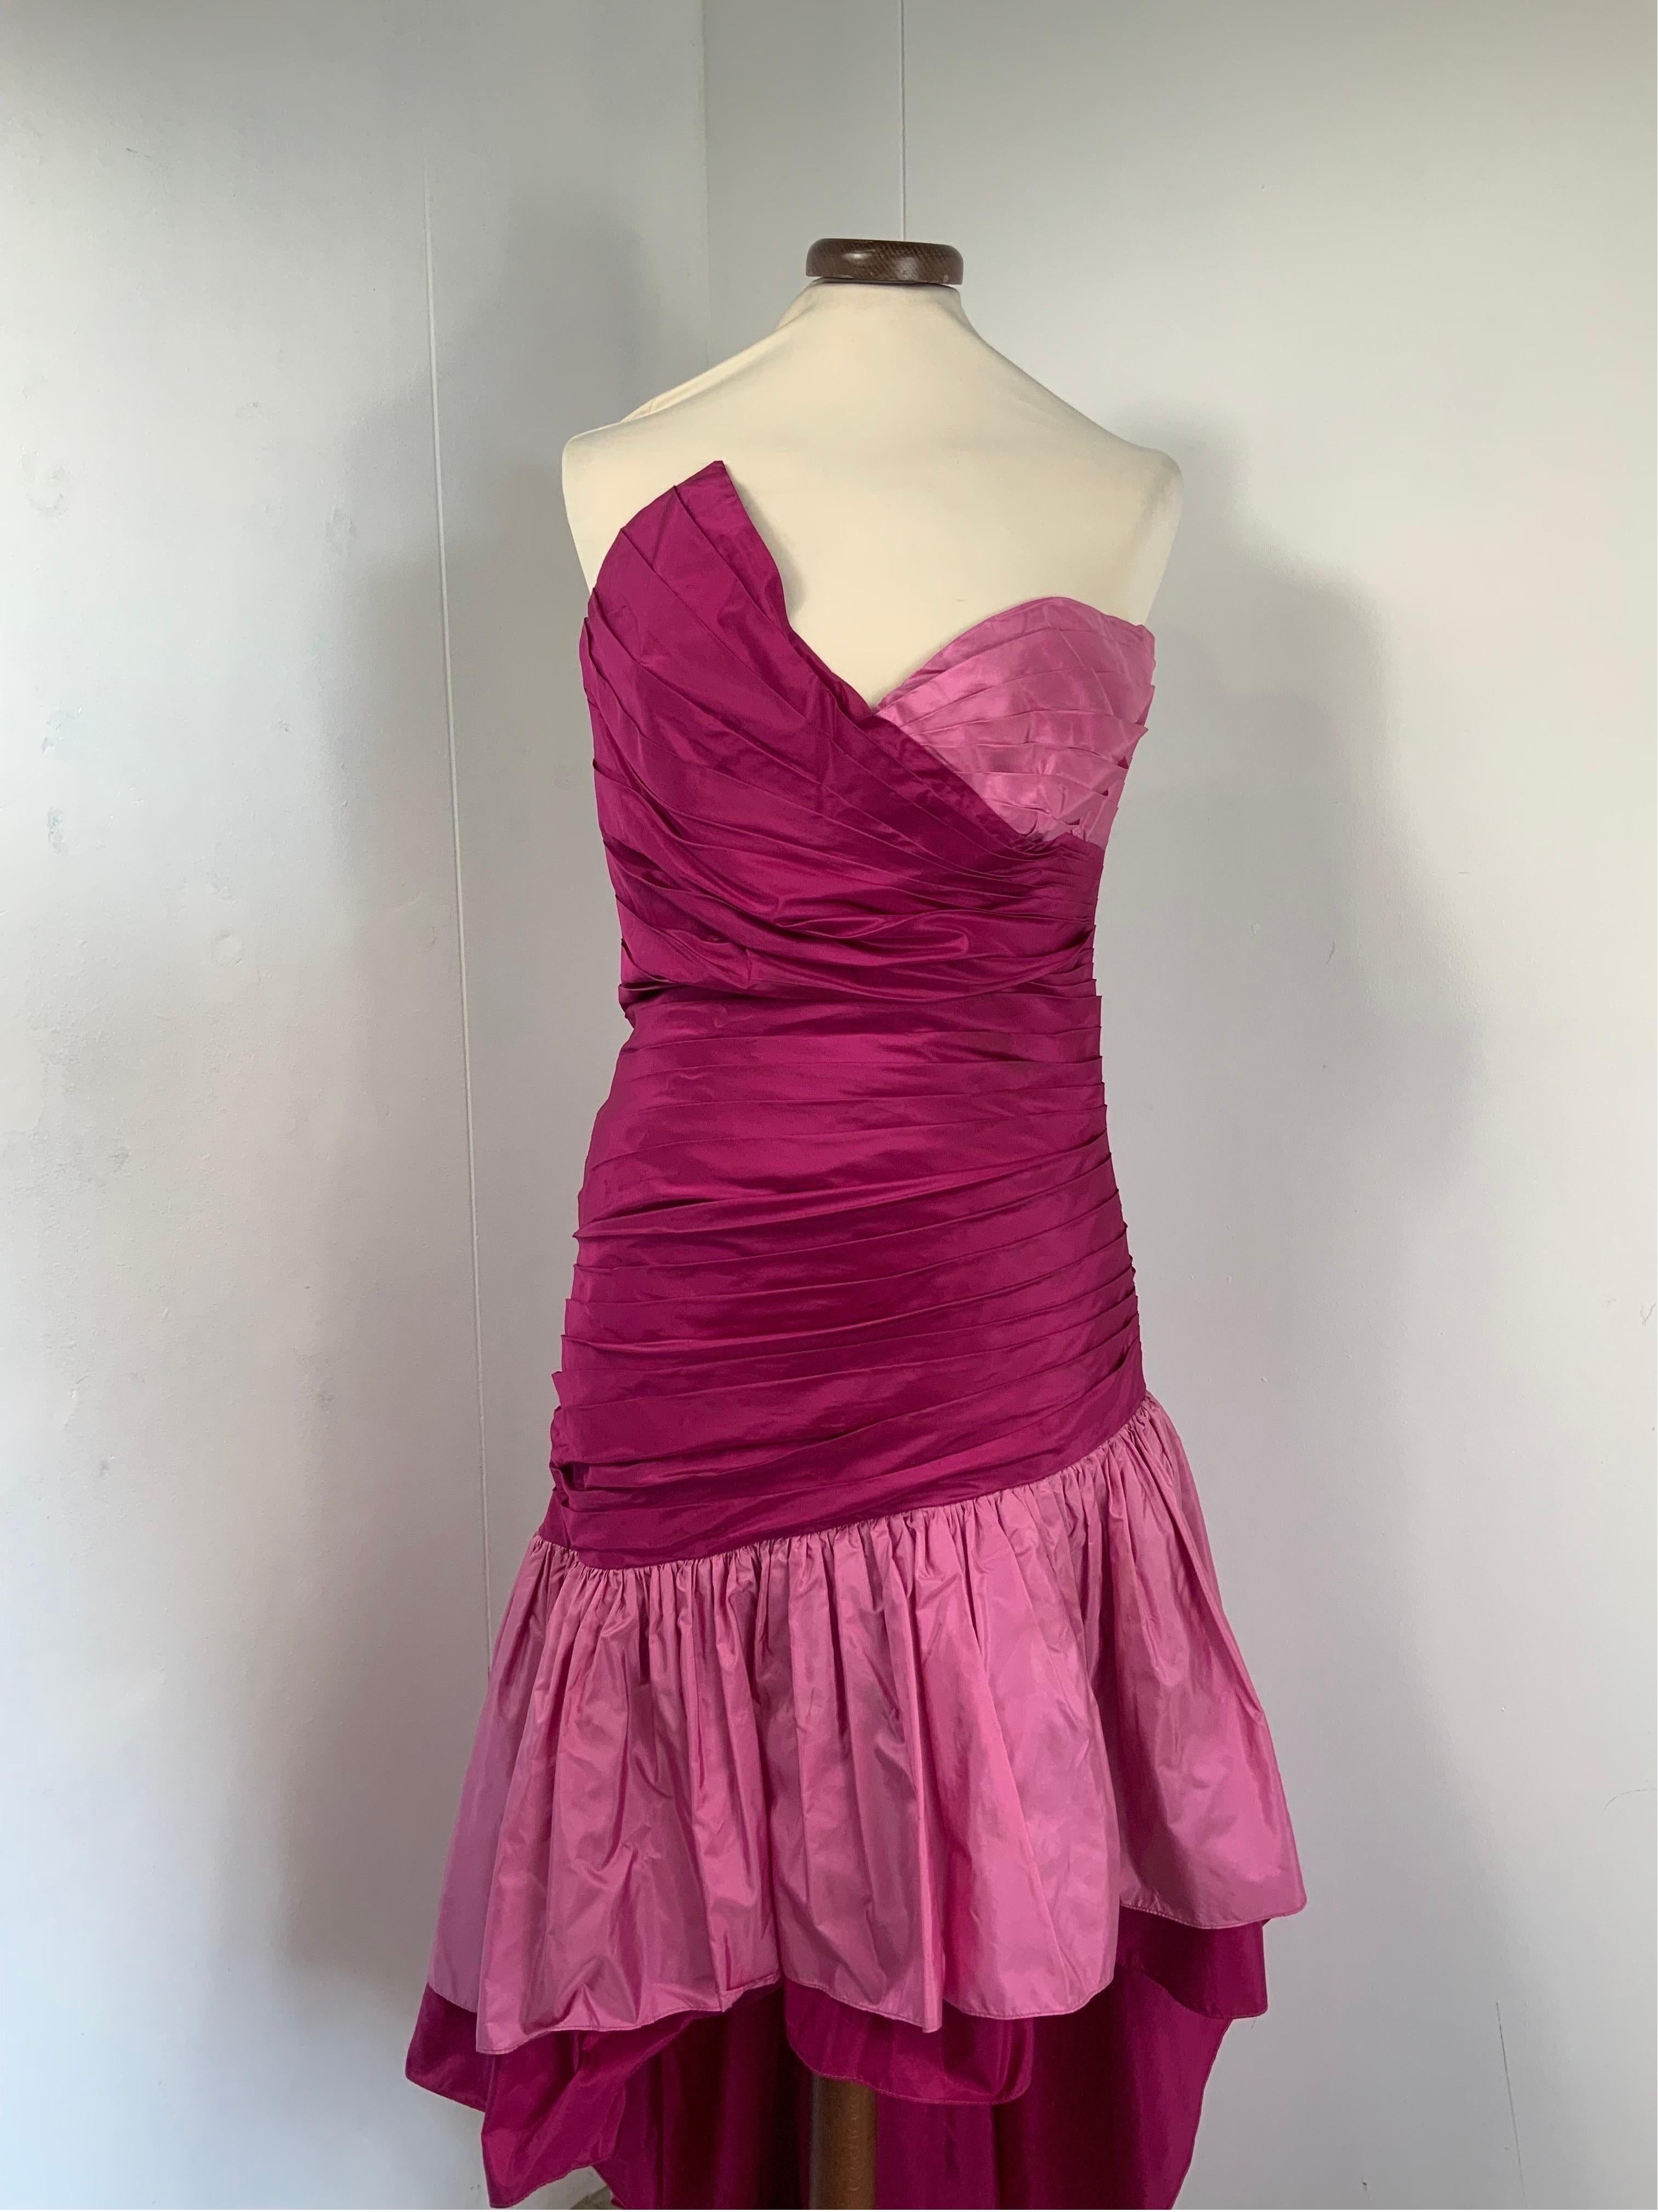 Roxy dress. 
Vintage piece.
100% silk.
Size 42
Bust 42
Waist 30
Length 125
Good conditions: as you can see on the tail it has a big halo. It shows normal use signs and tiny holes.